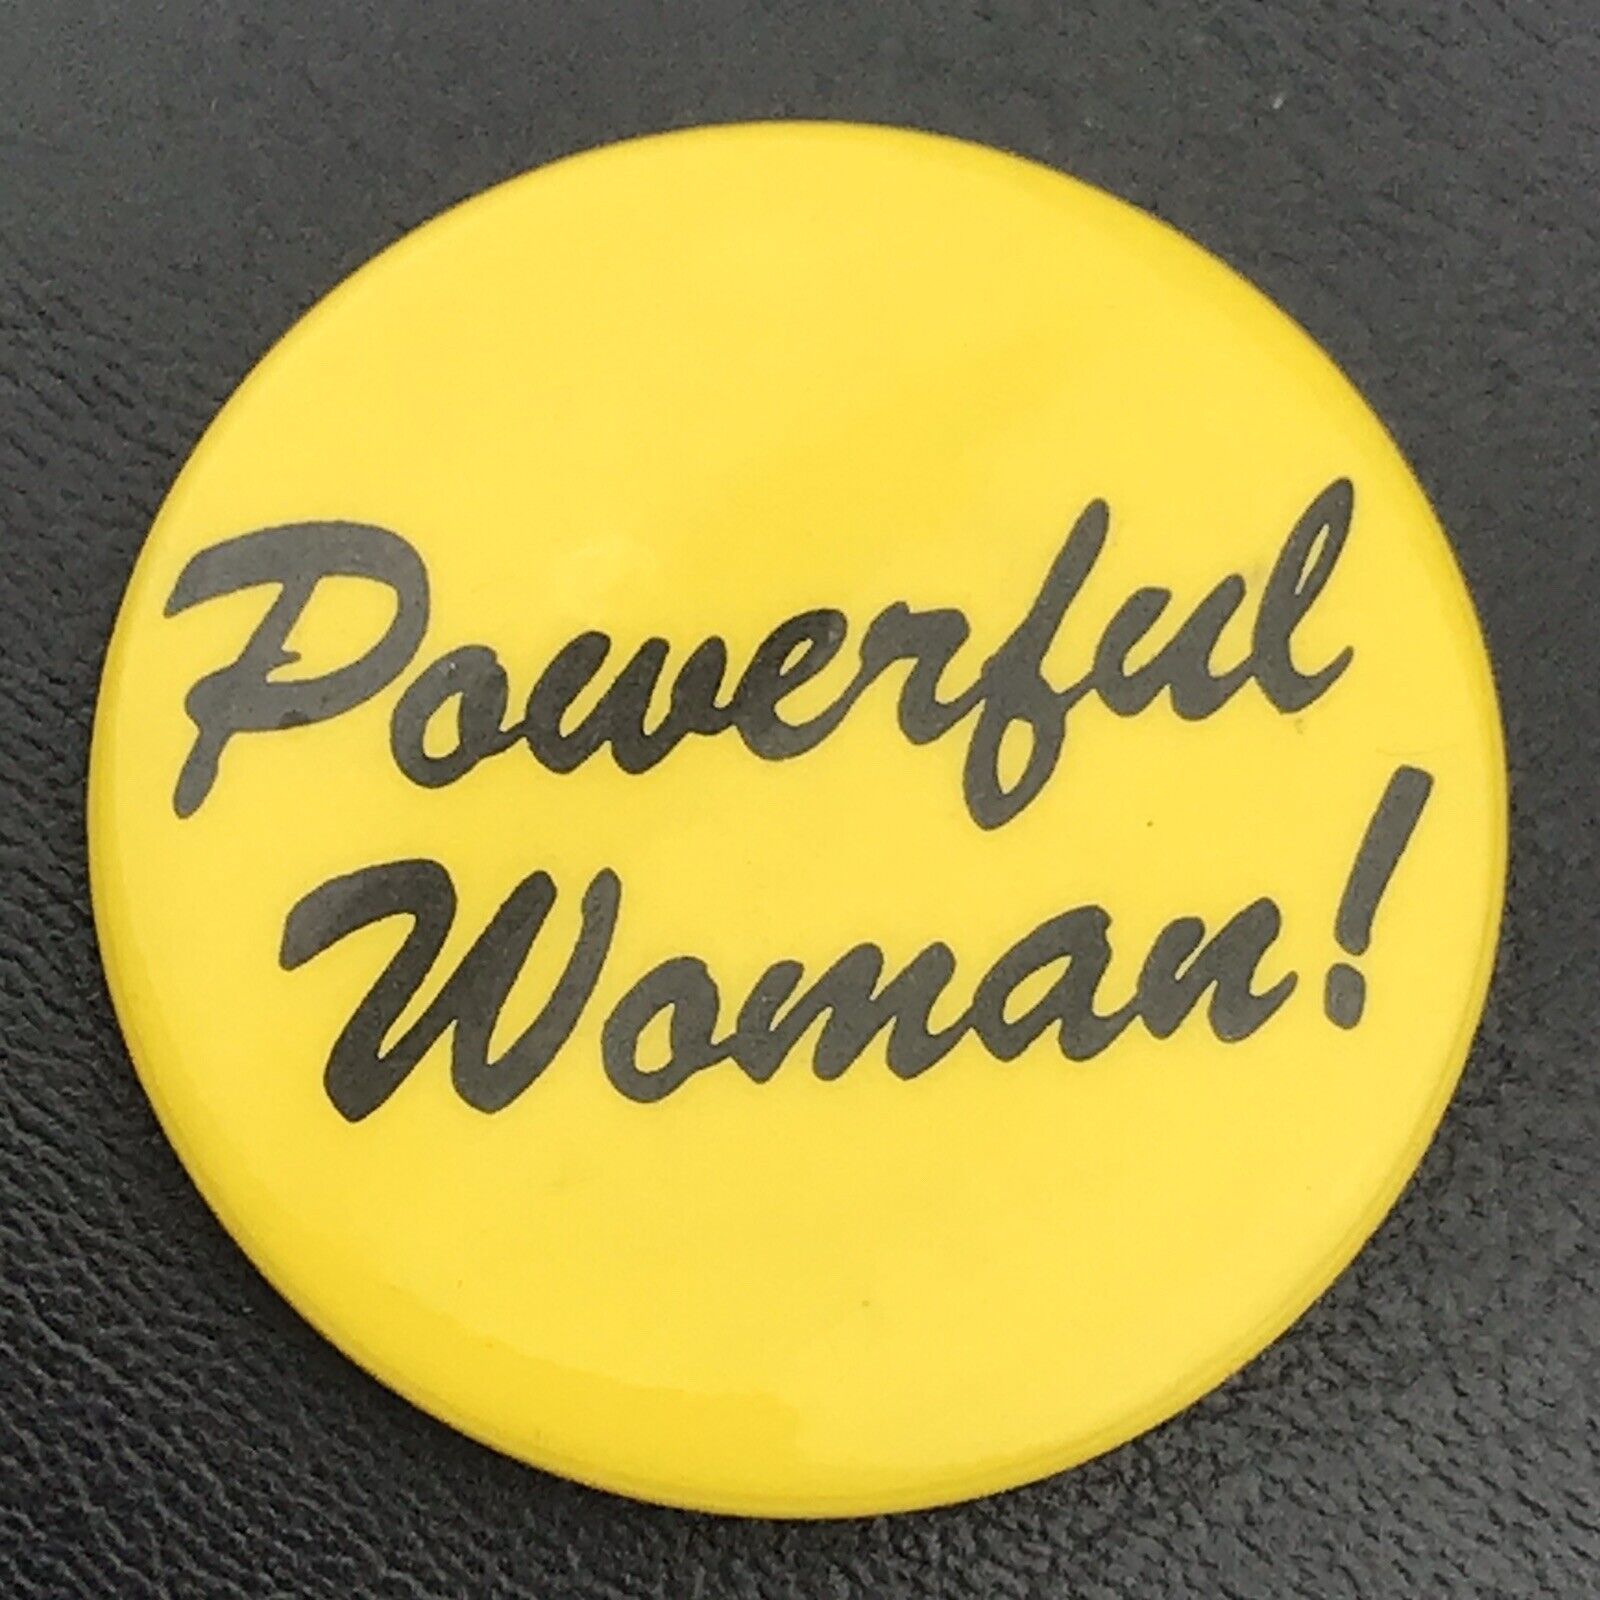 Powerful Woman Vintage Pin Button Pinback Feminism Social Justice